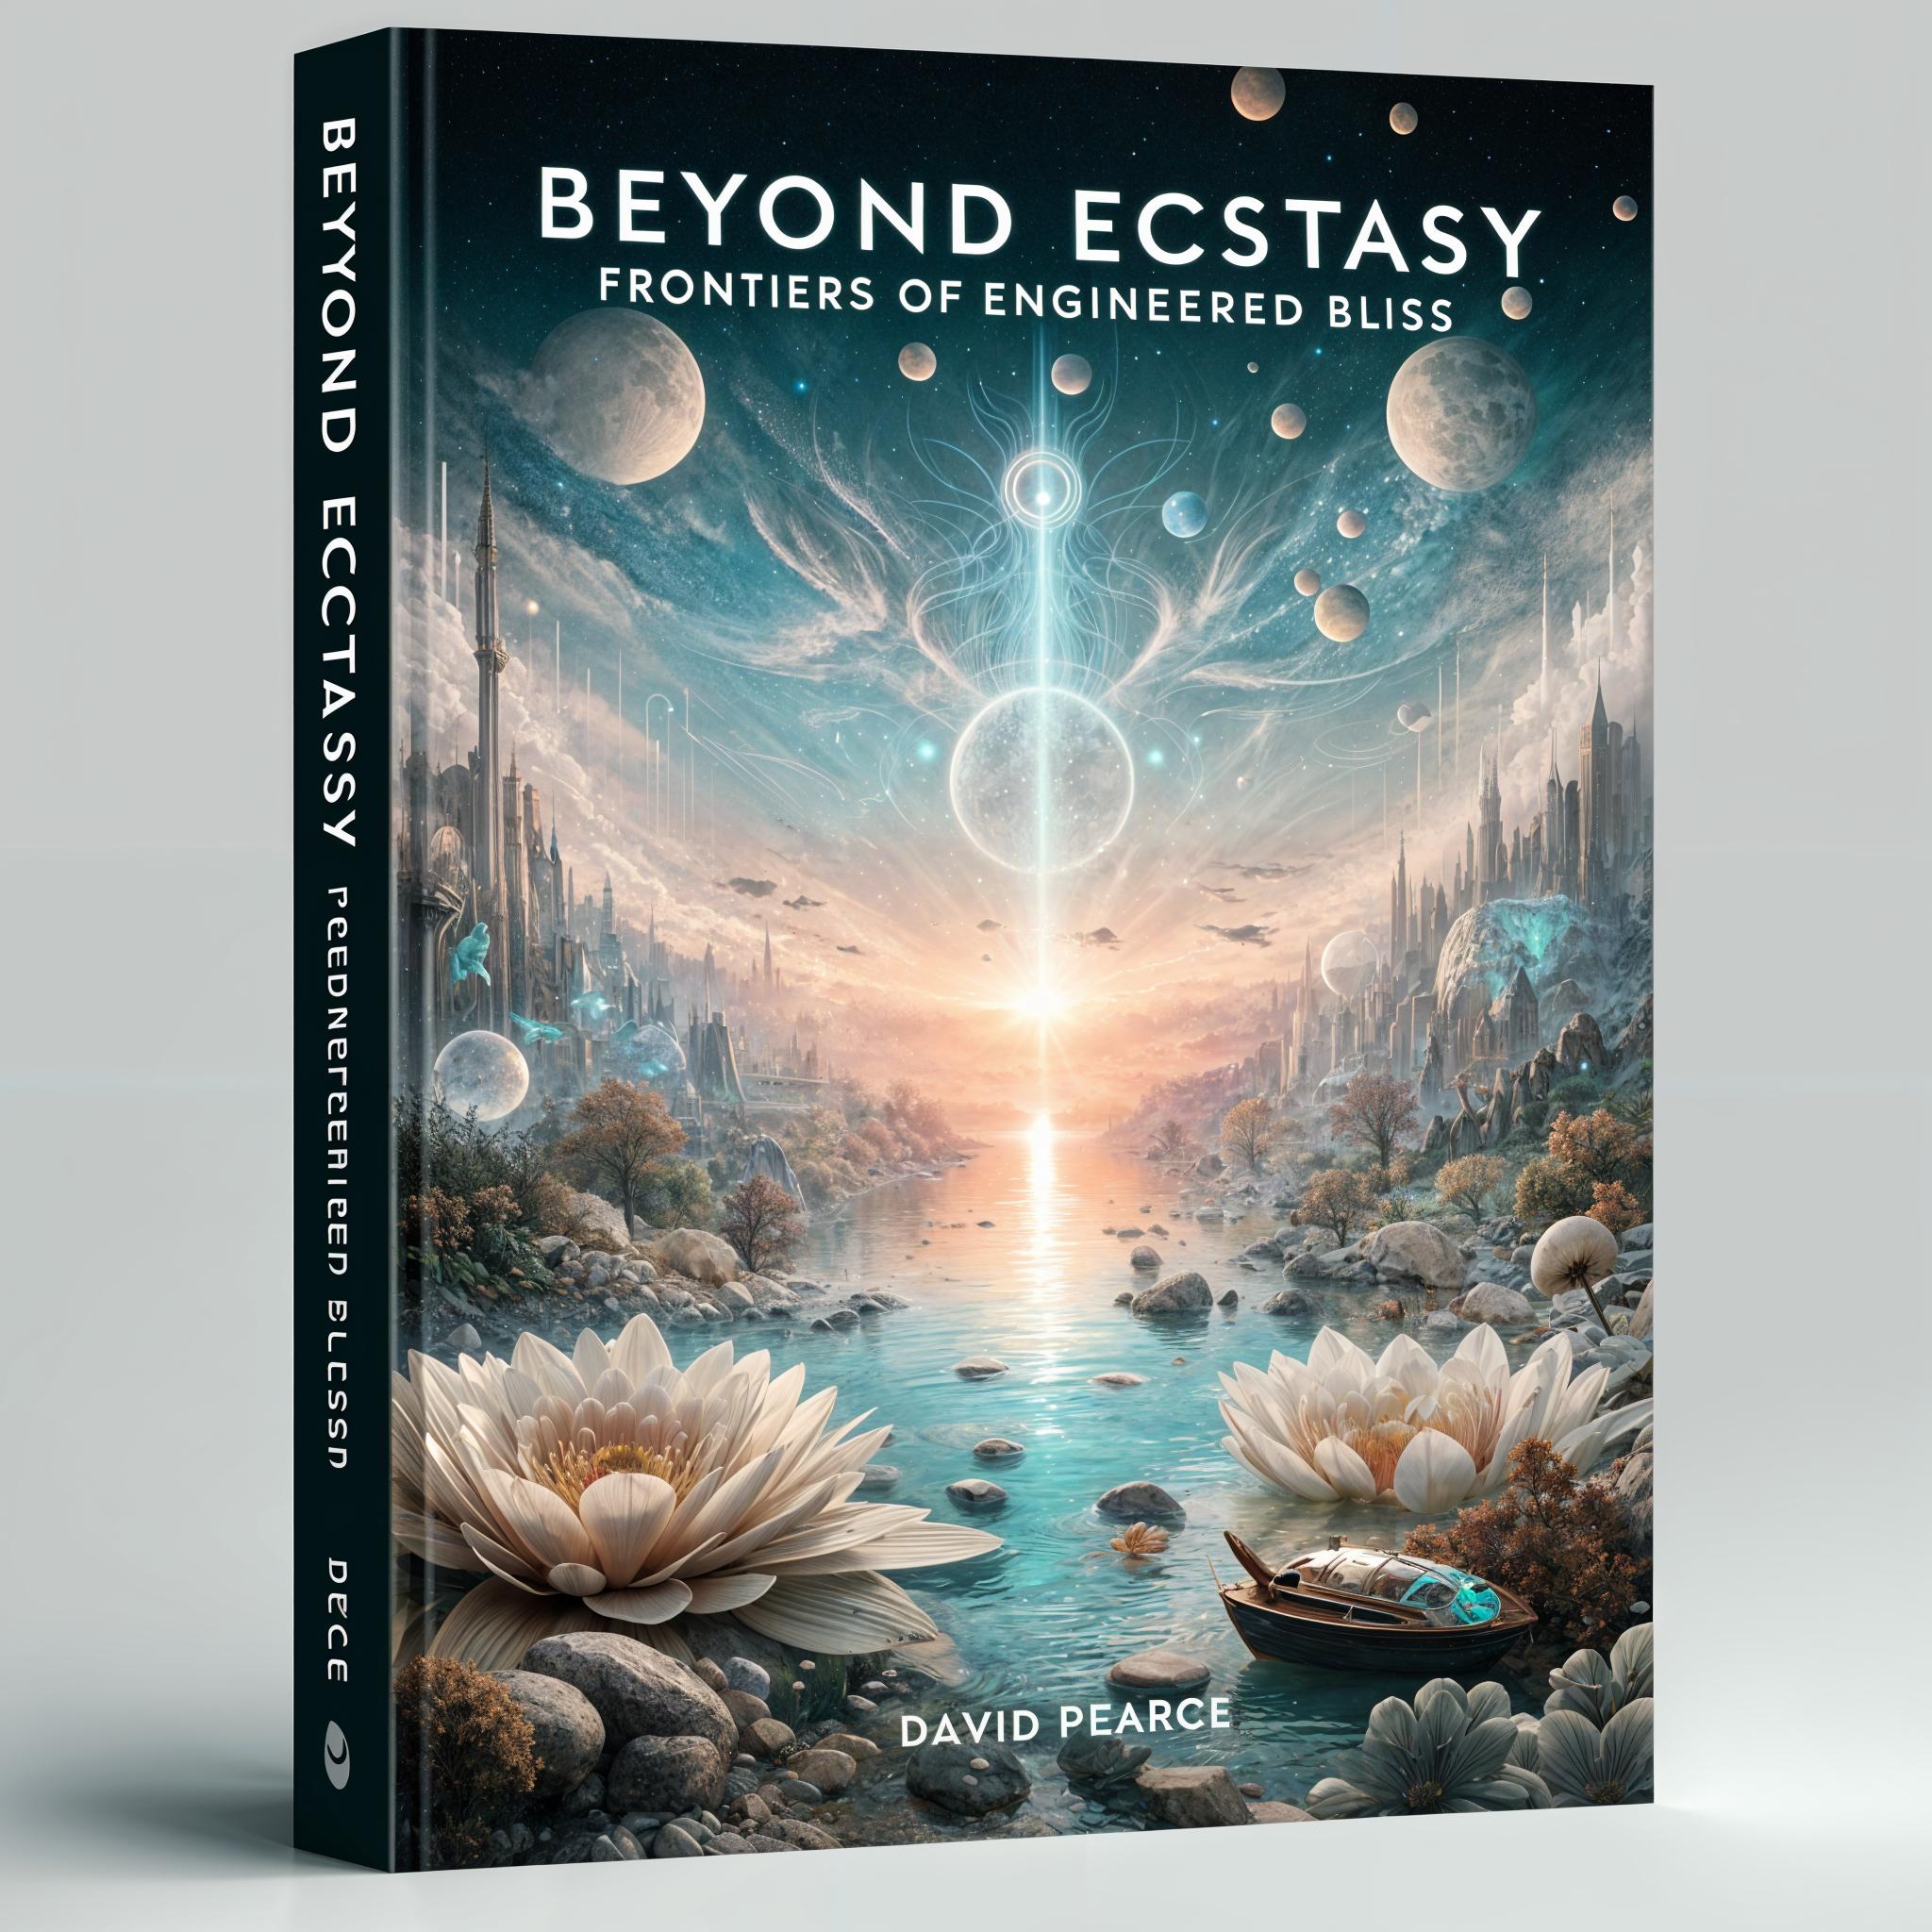 Beyond Ecstasy: Frontiers of Engineered Bliss by David Pearce